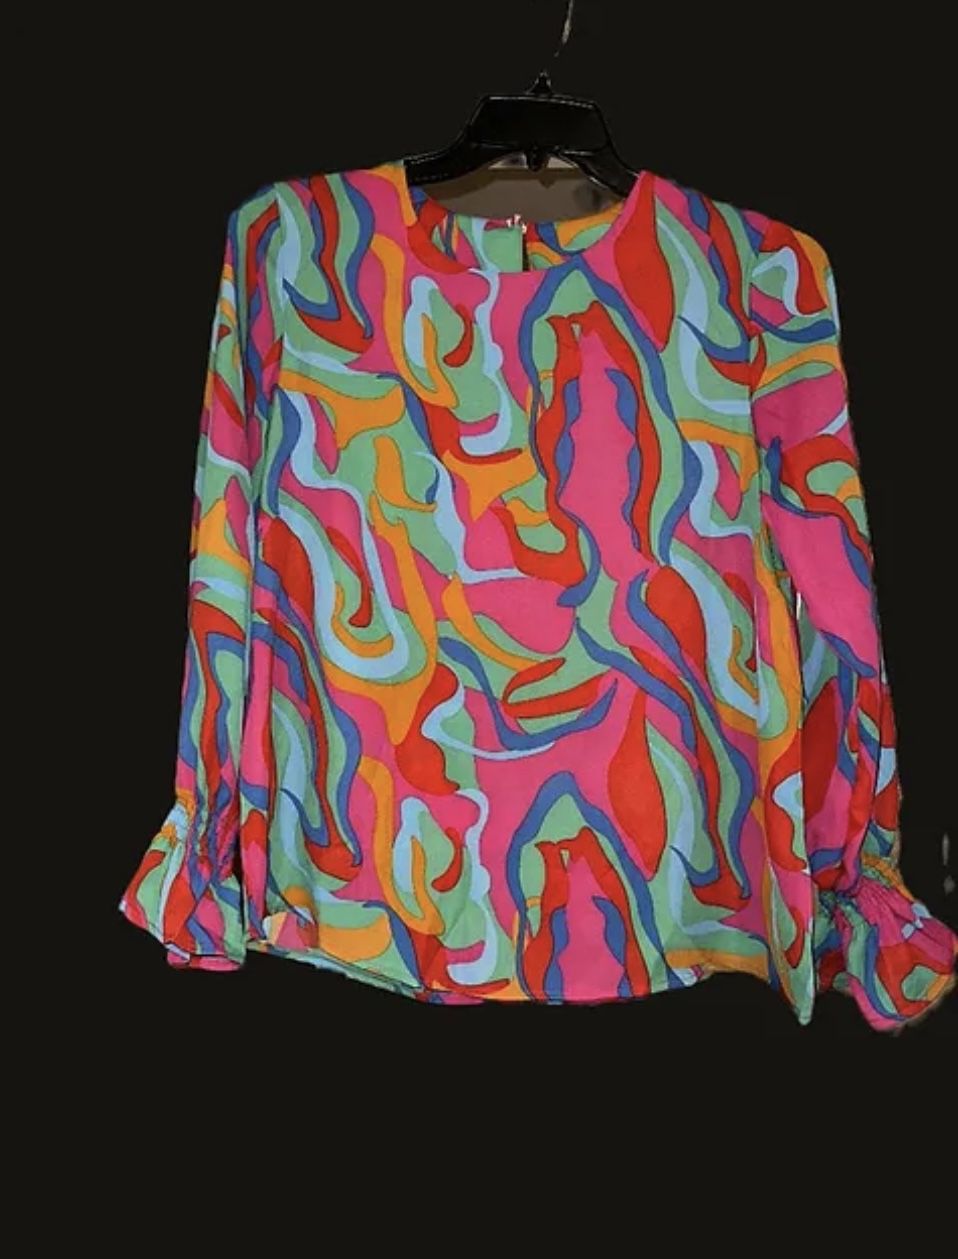 Brand New Size (Medium) Multi-Color Blouse with Ruffle Sleeves